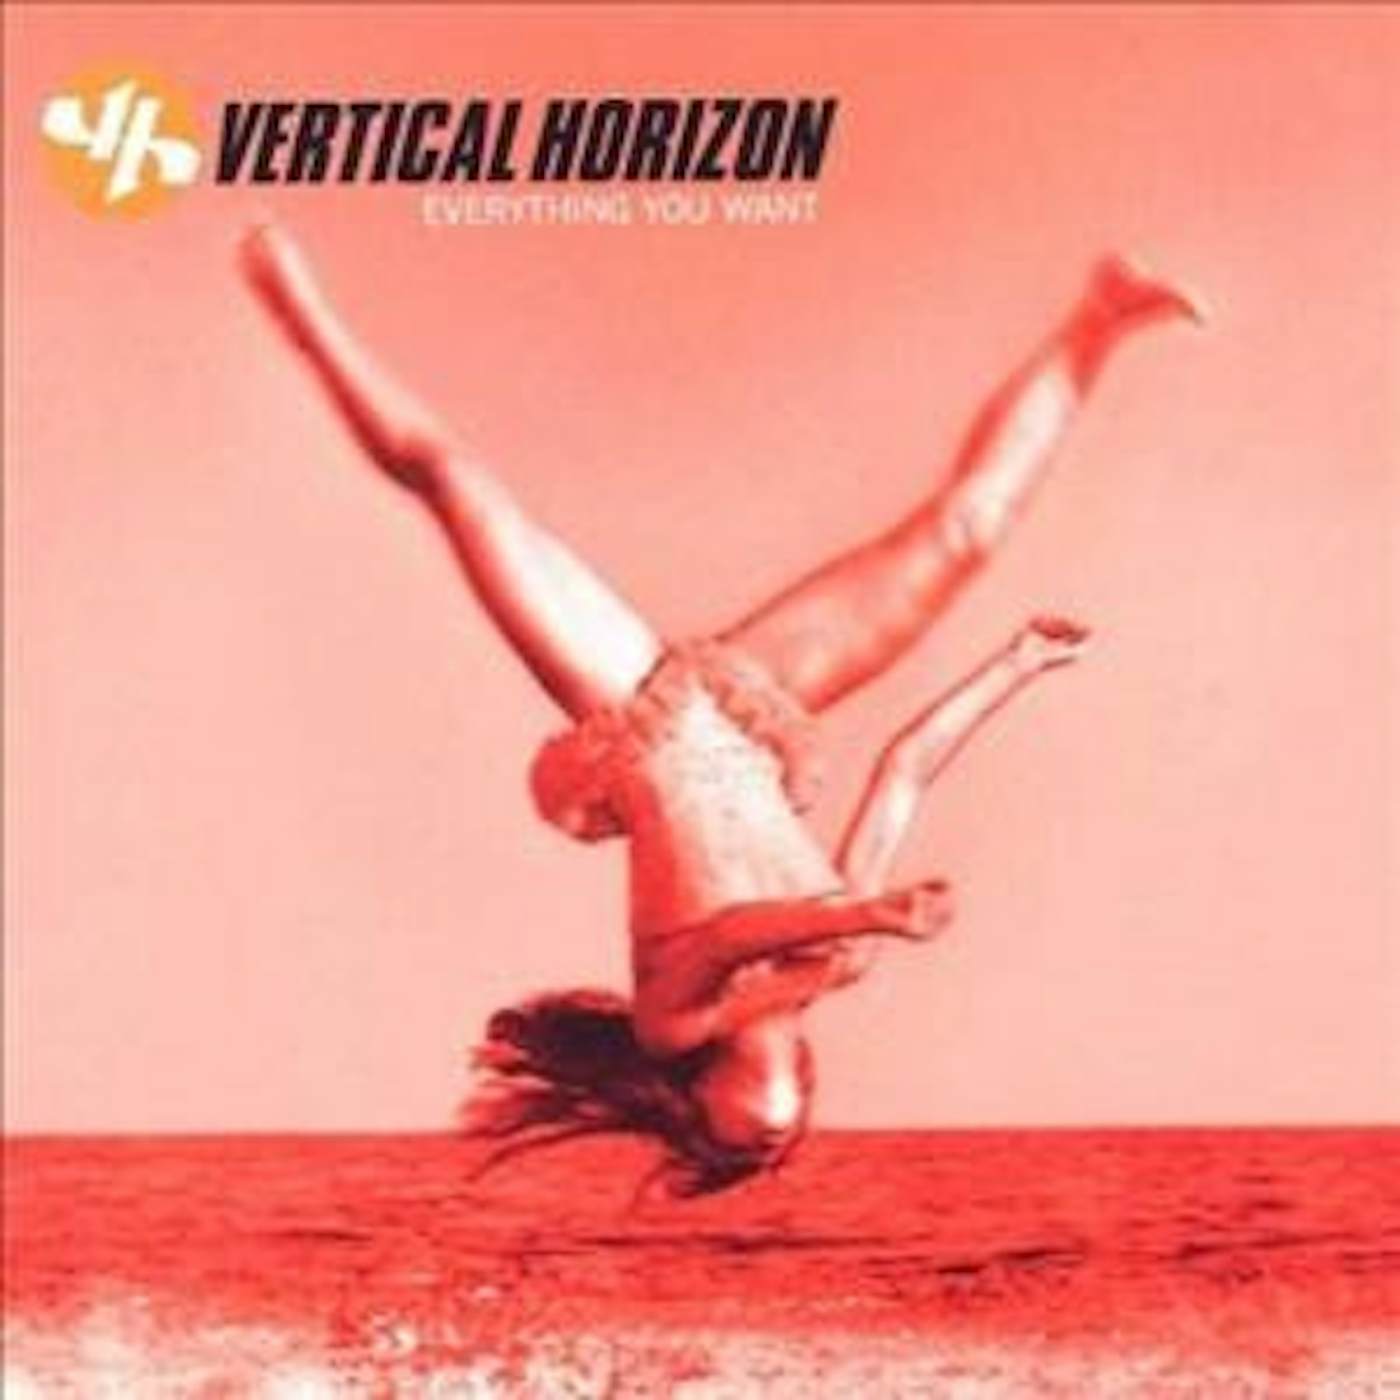 Vertical Horizon Everything You Want Vinyl Record